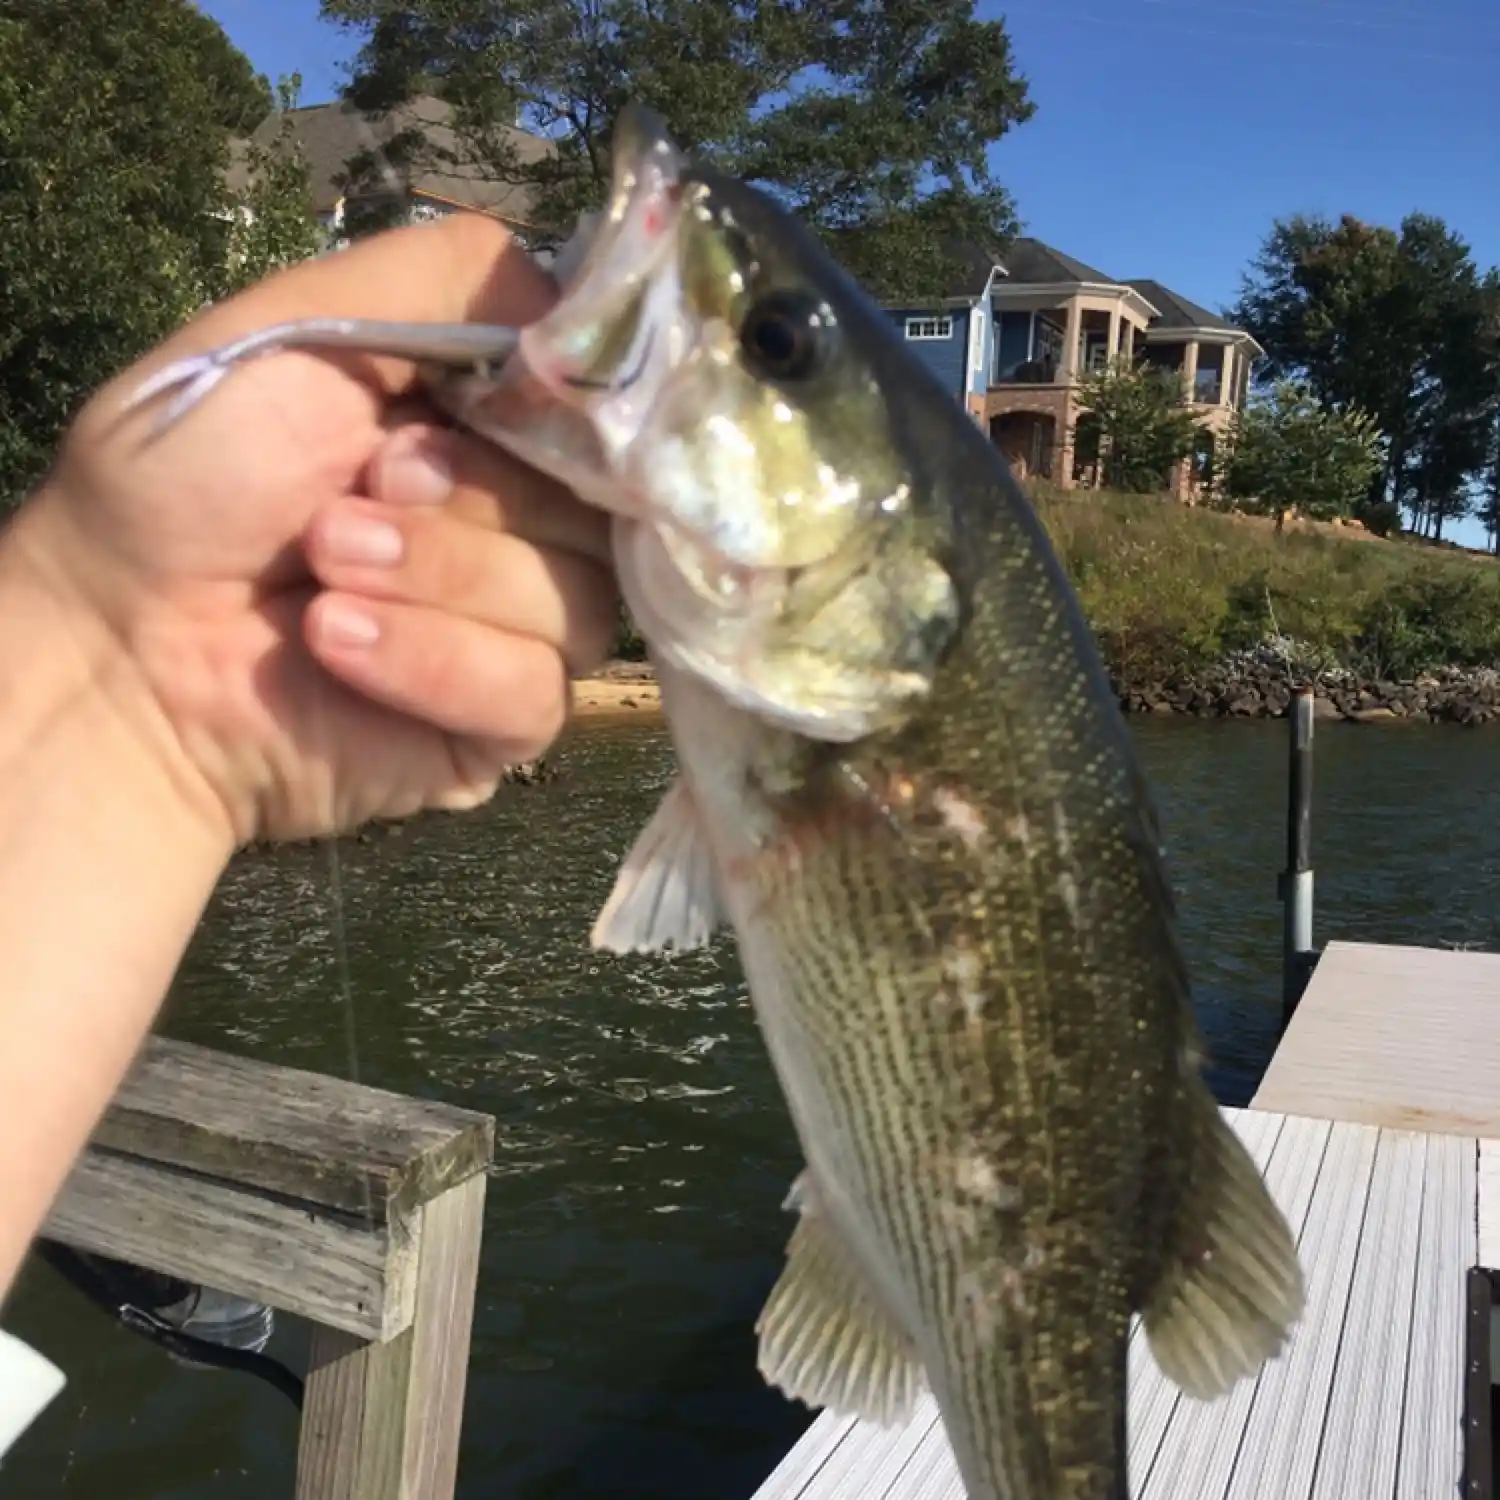 Sight-fish for Lake Wylie bass